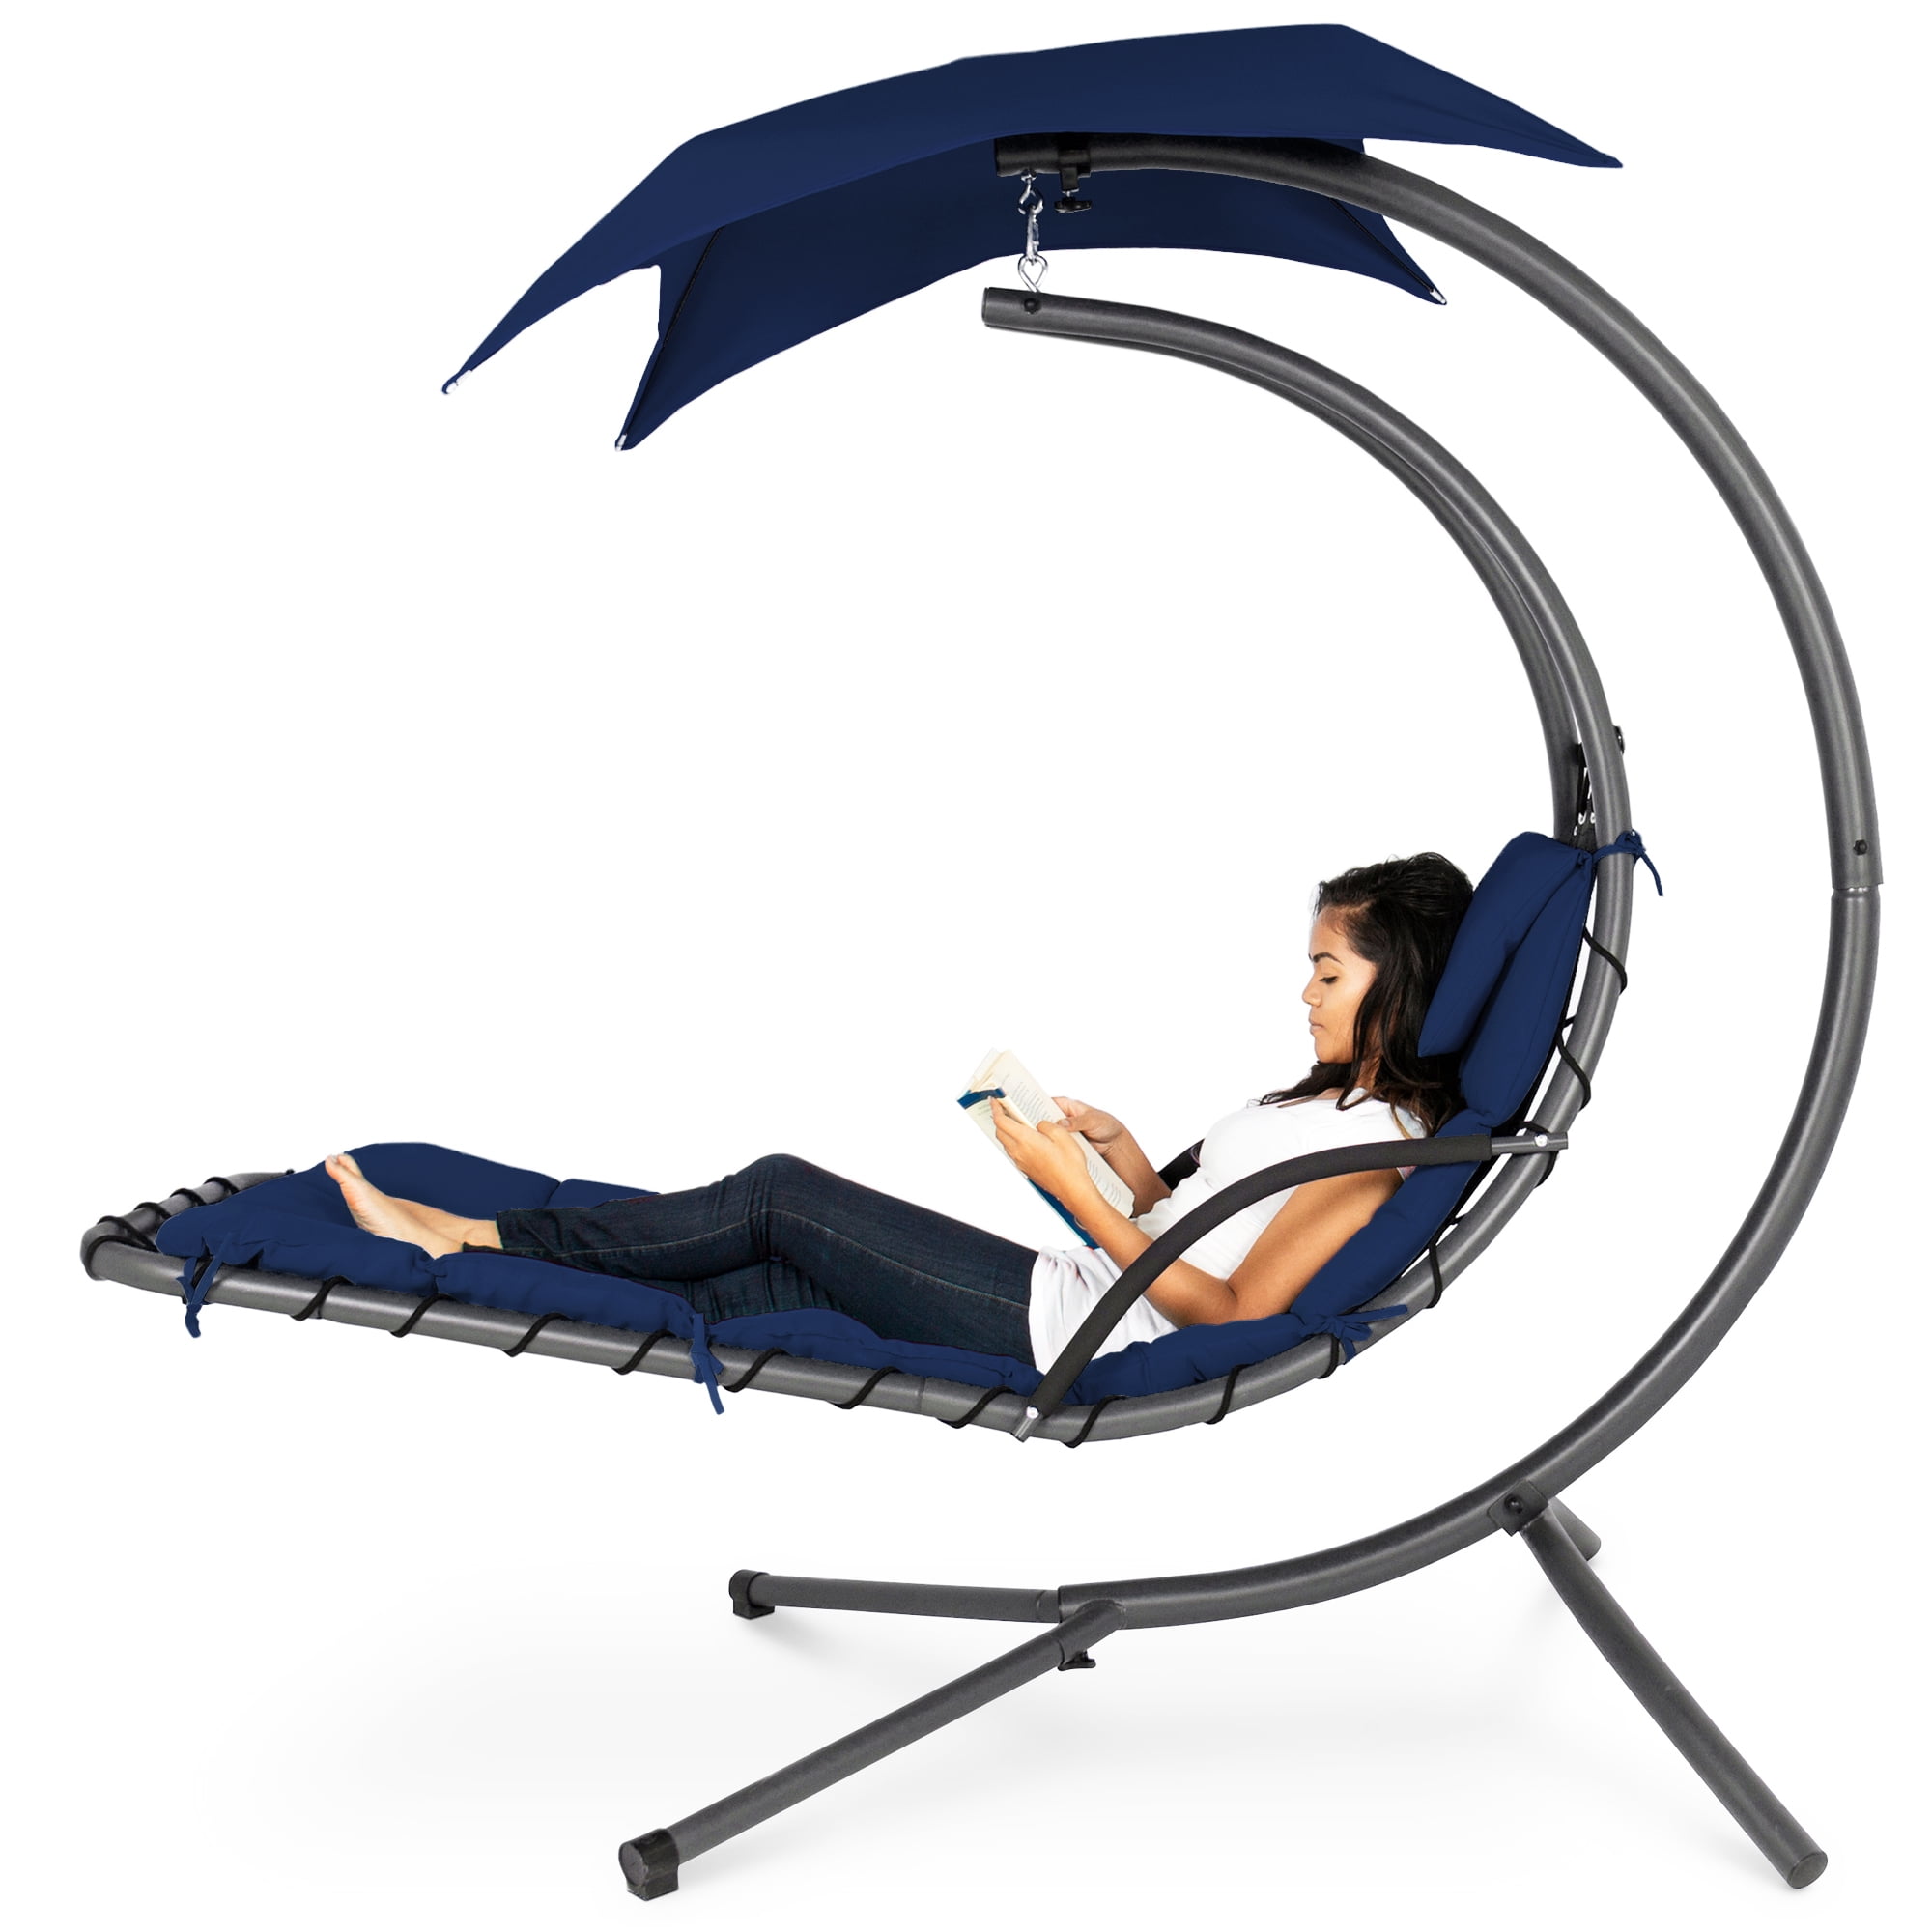 Best Choice Products Hanging Curved Chaise Lounge Chair Swing for Backyard, Patio w/ Pillow, Canopy, Stand - Navy Blue